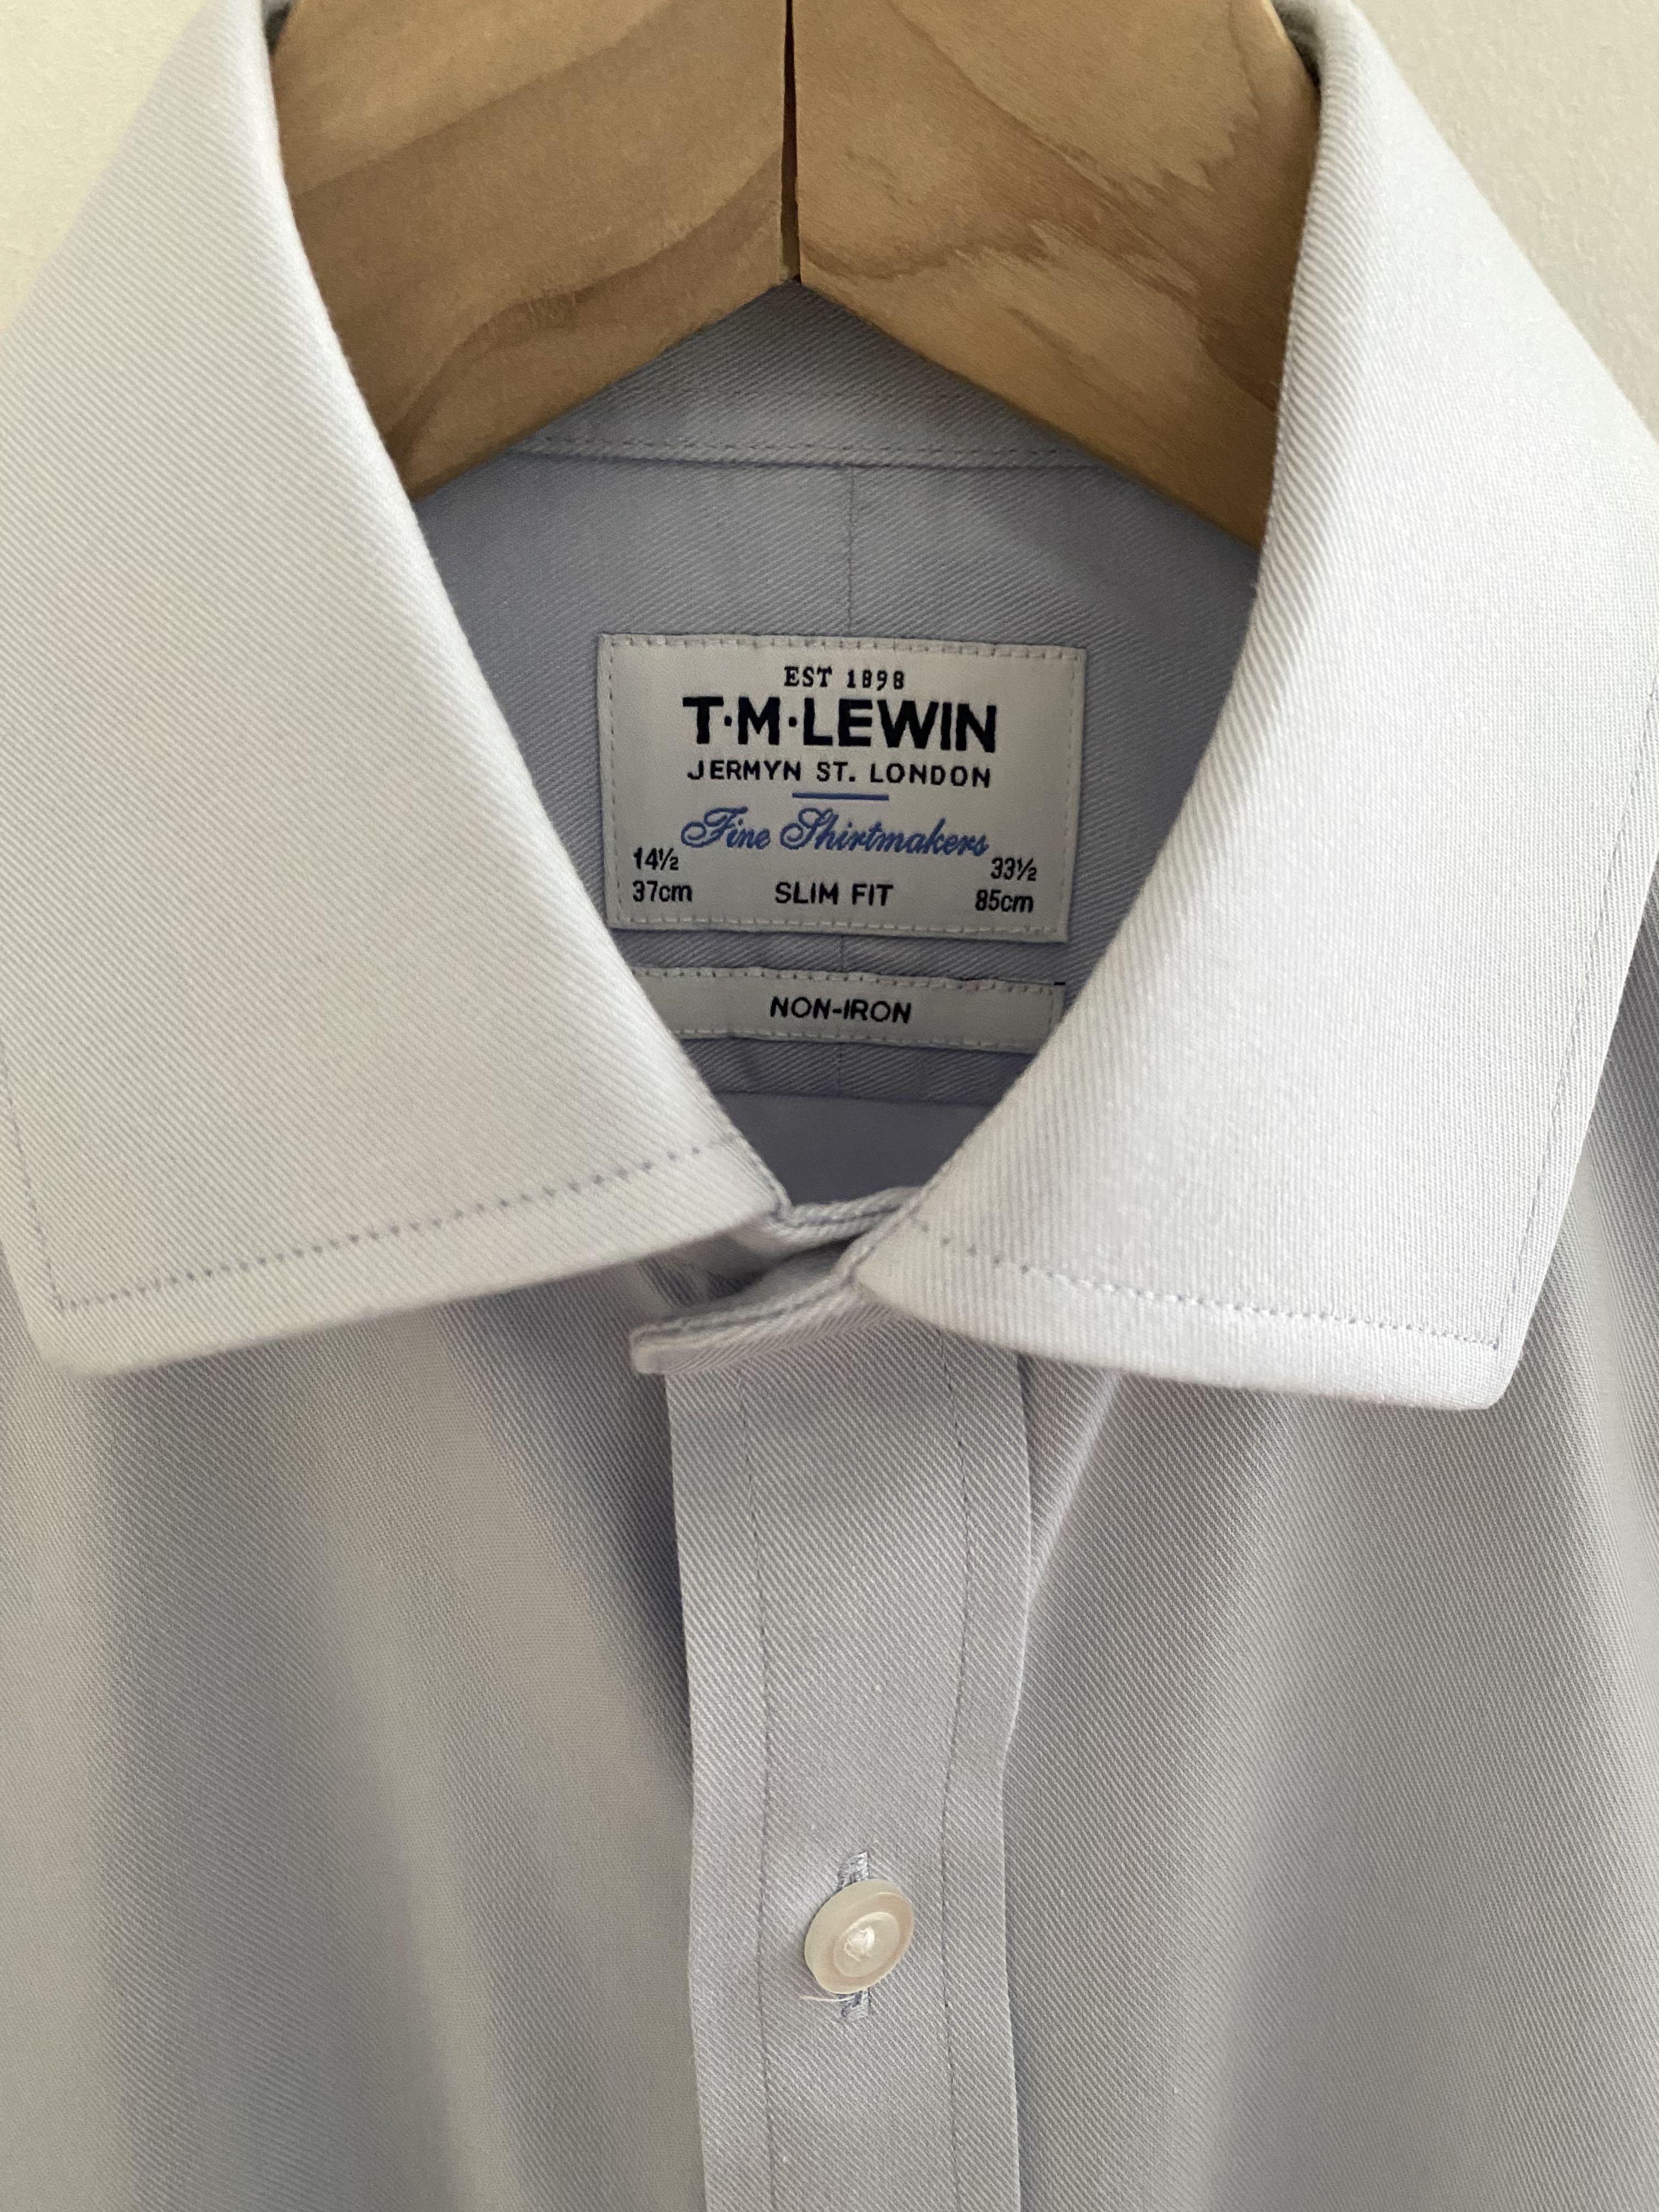 Lewin Non-Iron Formal Shirt, Men's Fashion, Tops & Sets, Formal Carousell